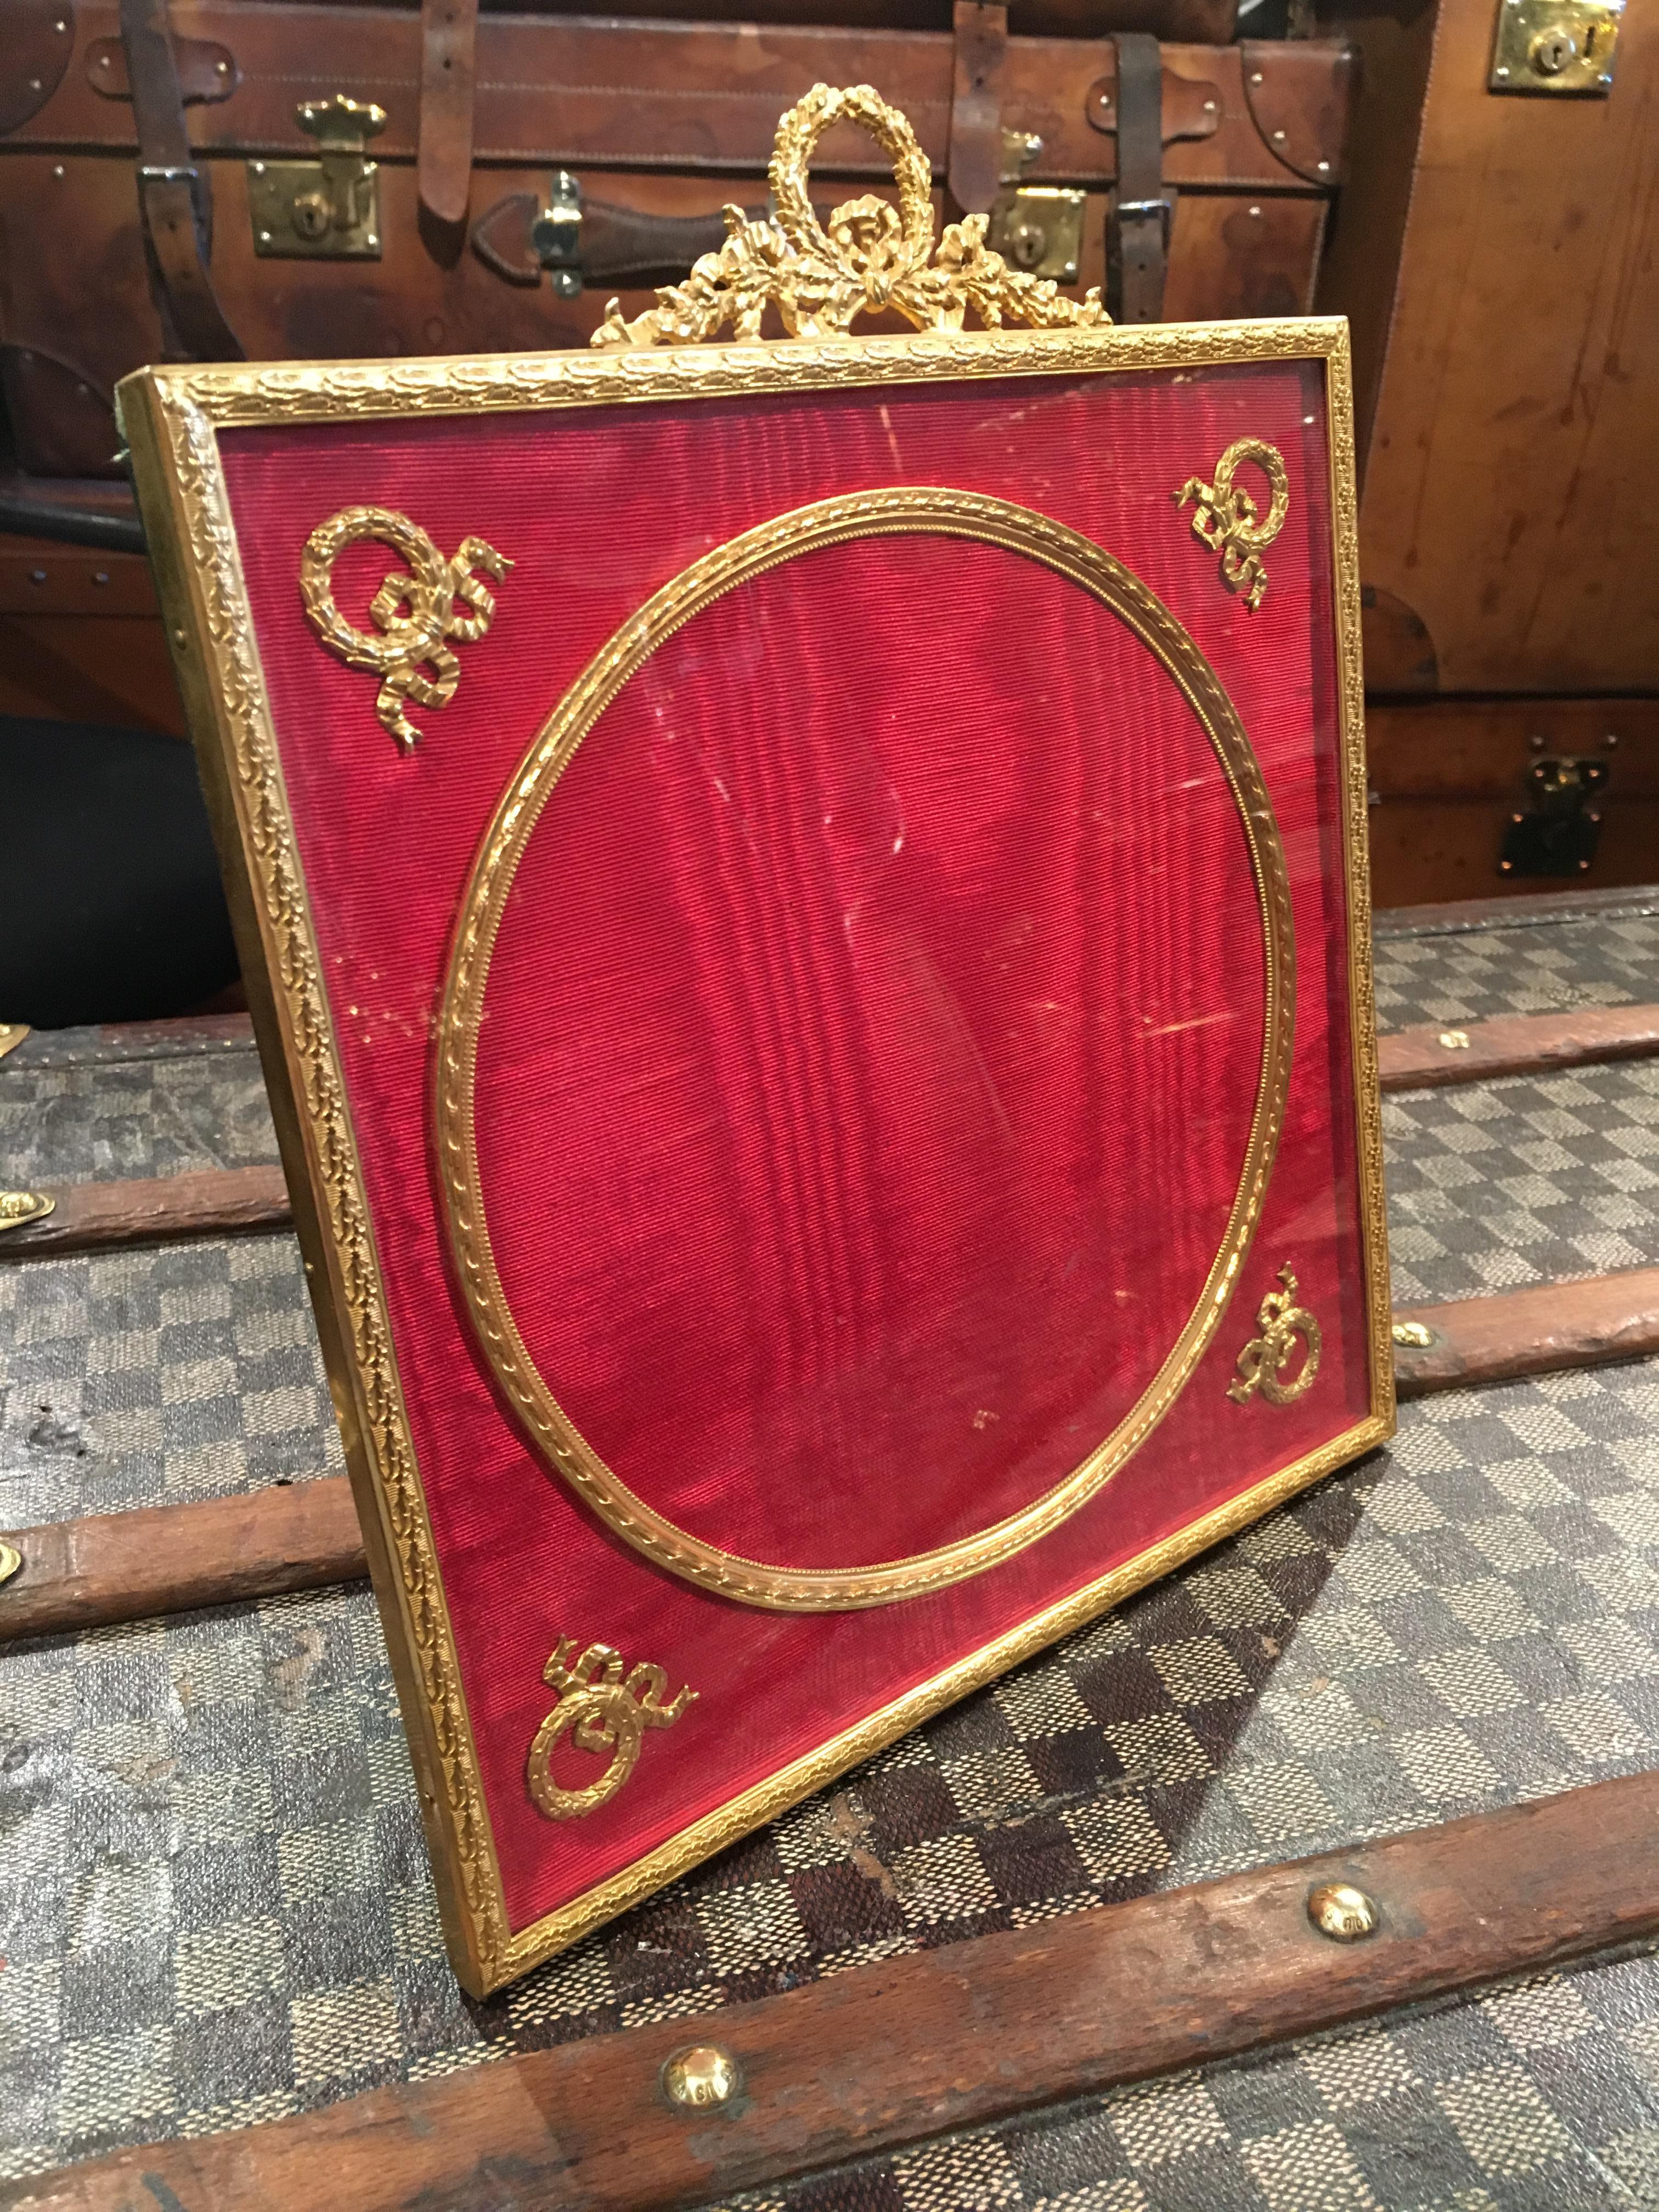 An extremely attractive gilt bronze circular photograph frame, circa 1900.

In superb almost unused condition, the gilding is extremely vibrant and bright, as is the moiré silk lining.

The frame measures 9 3/4 inches wide and 11 1/4 inches